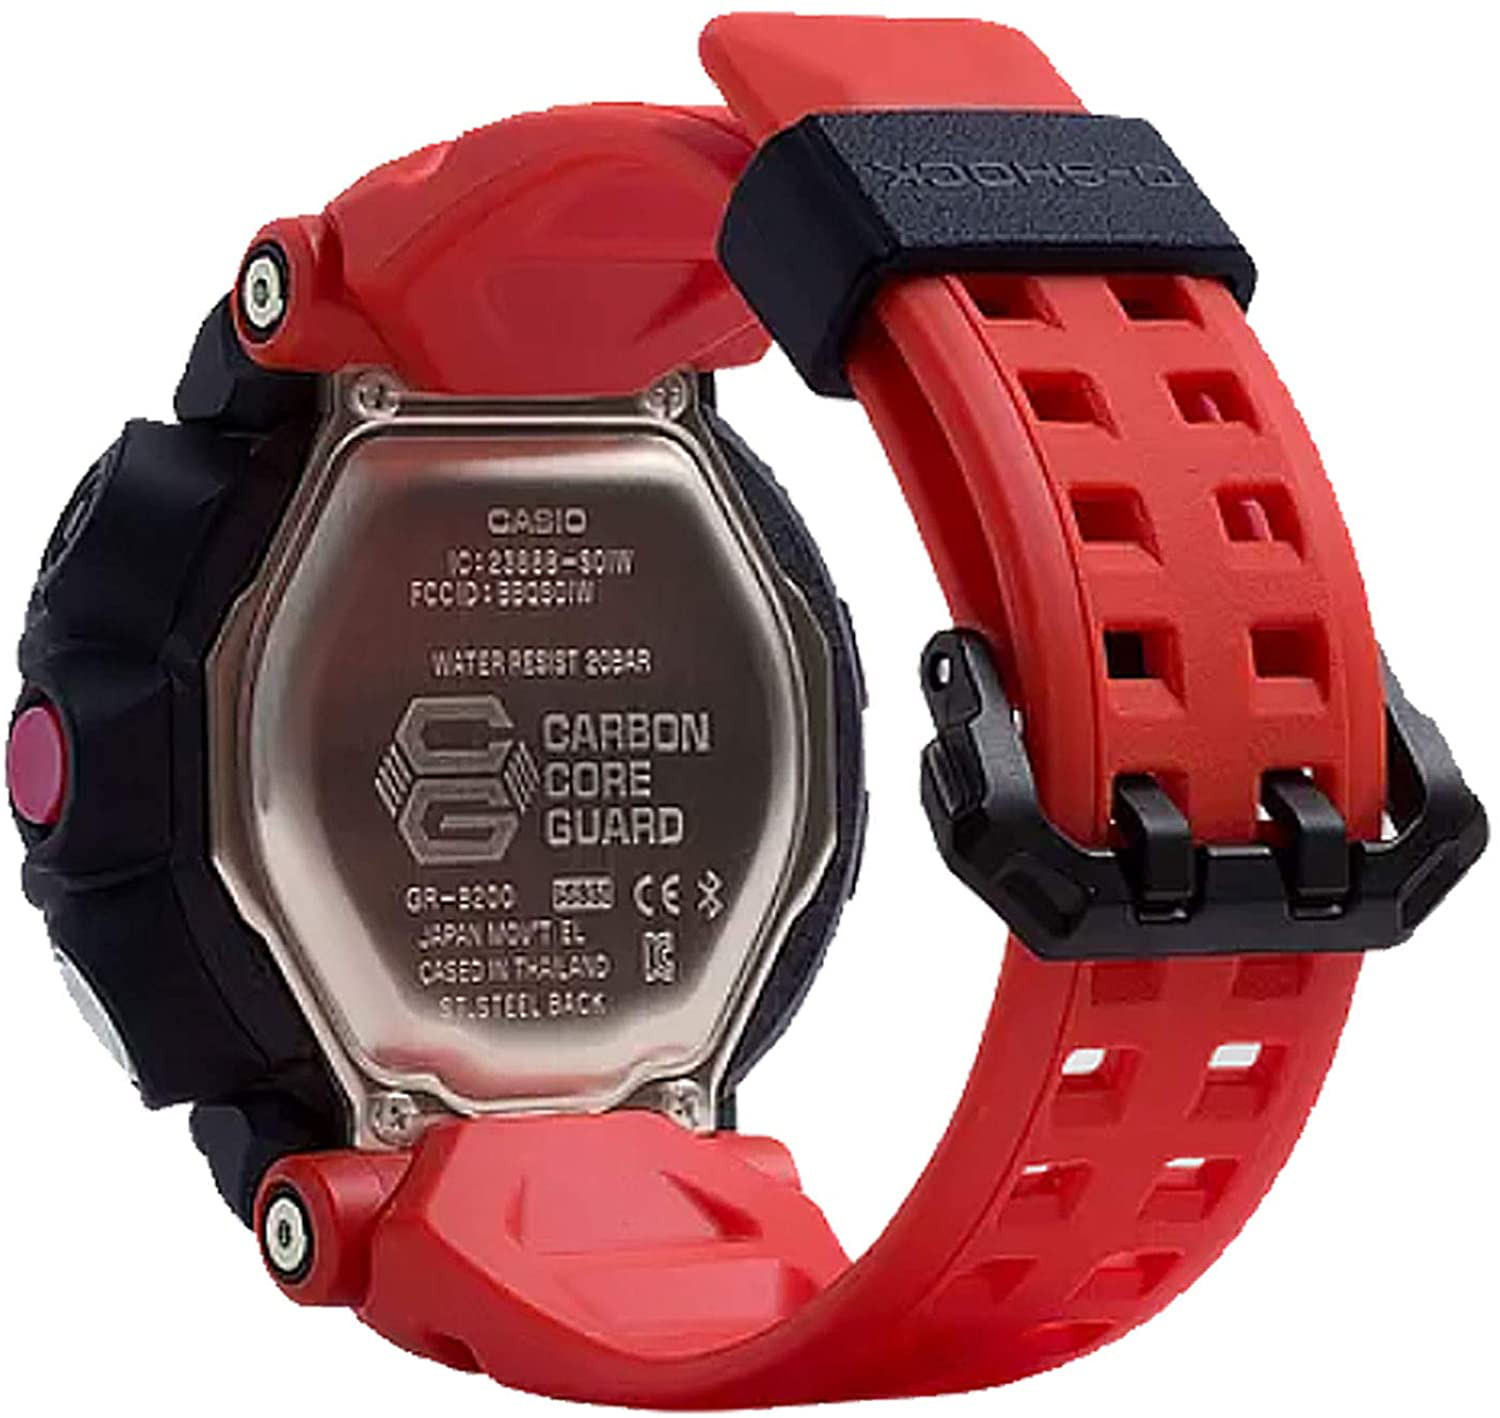 G-Shock Men's GRB200-1A9 Gravity Master Watch, Red, One Size